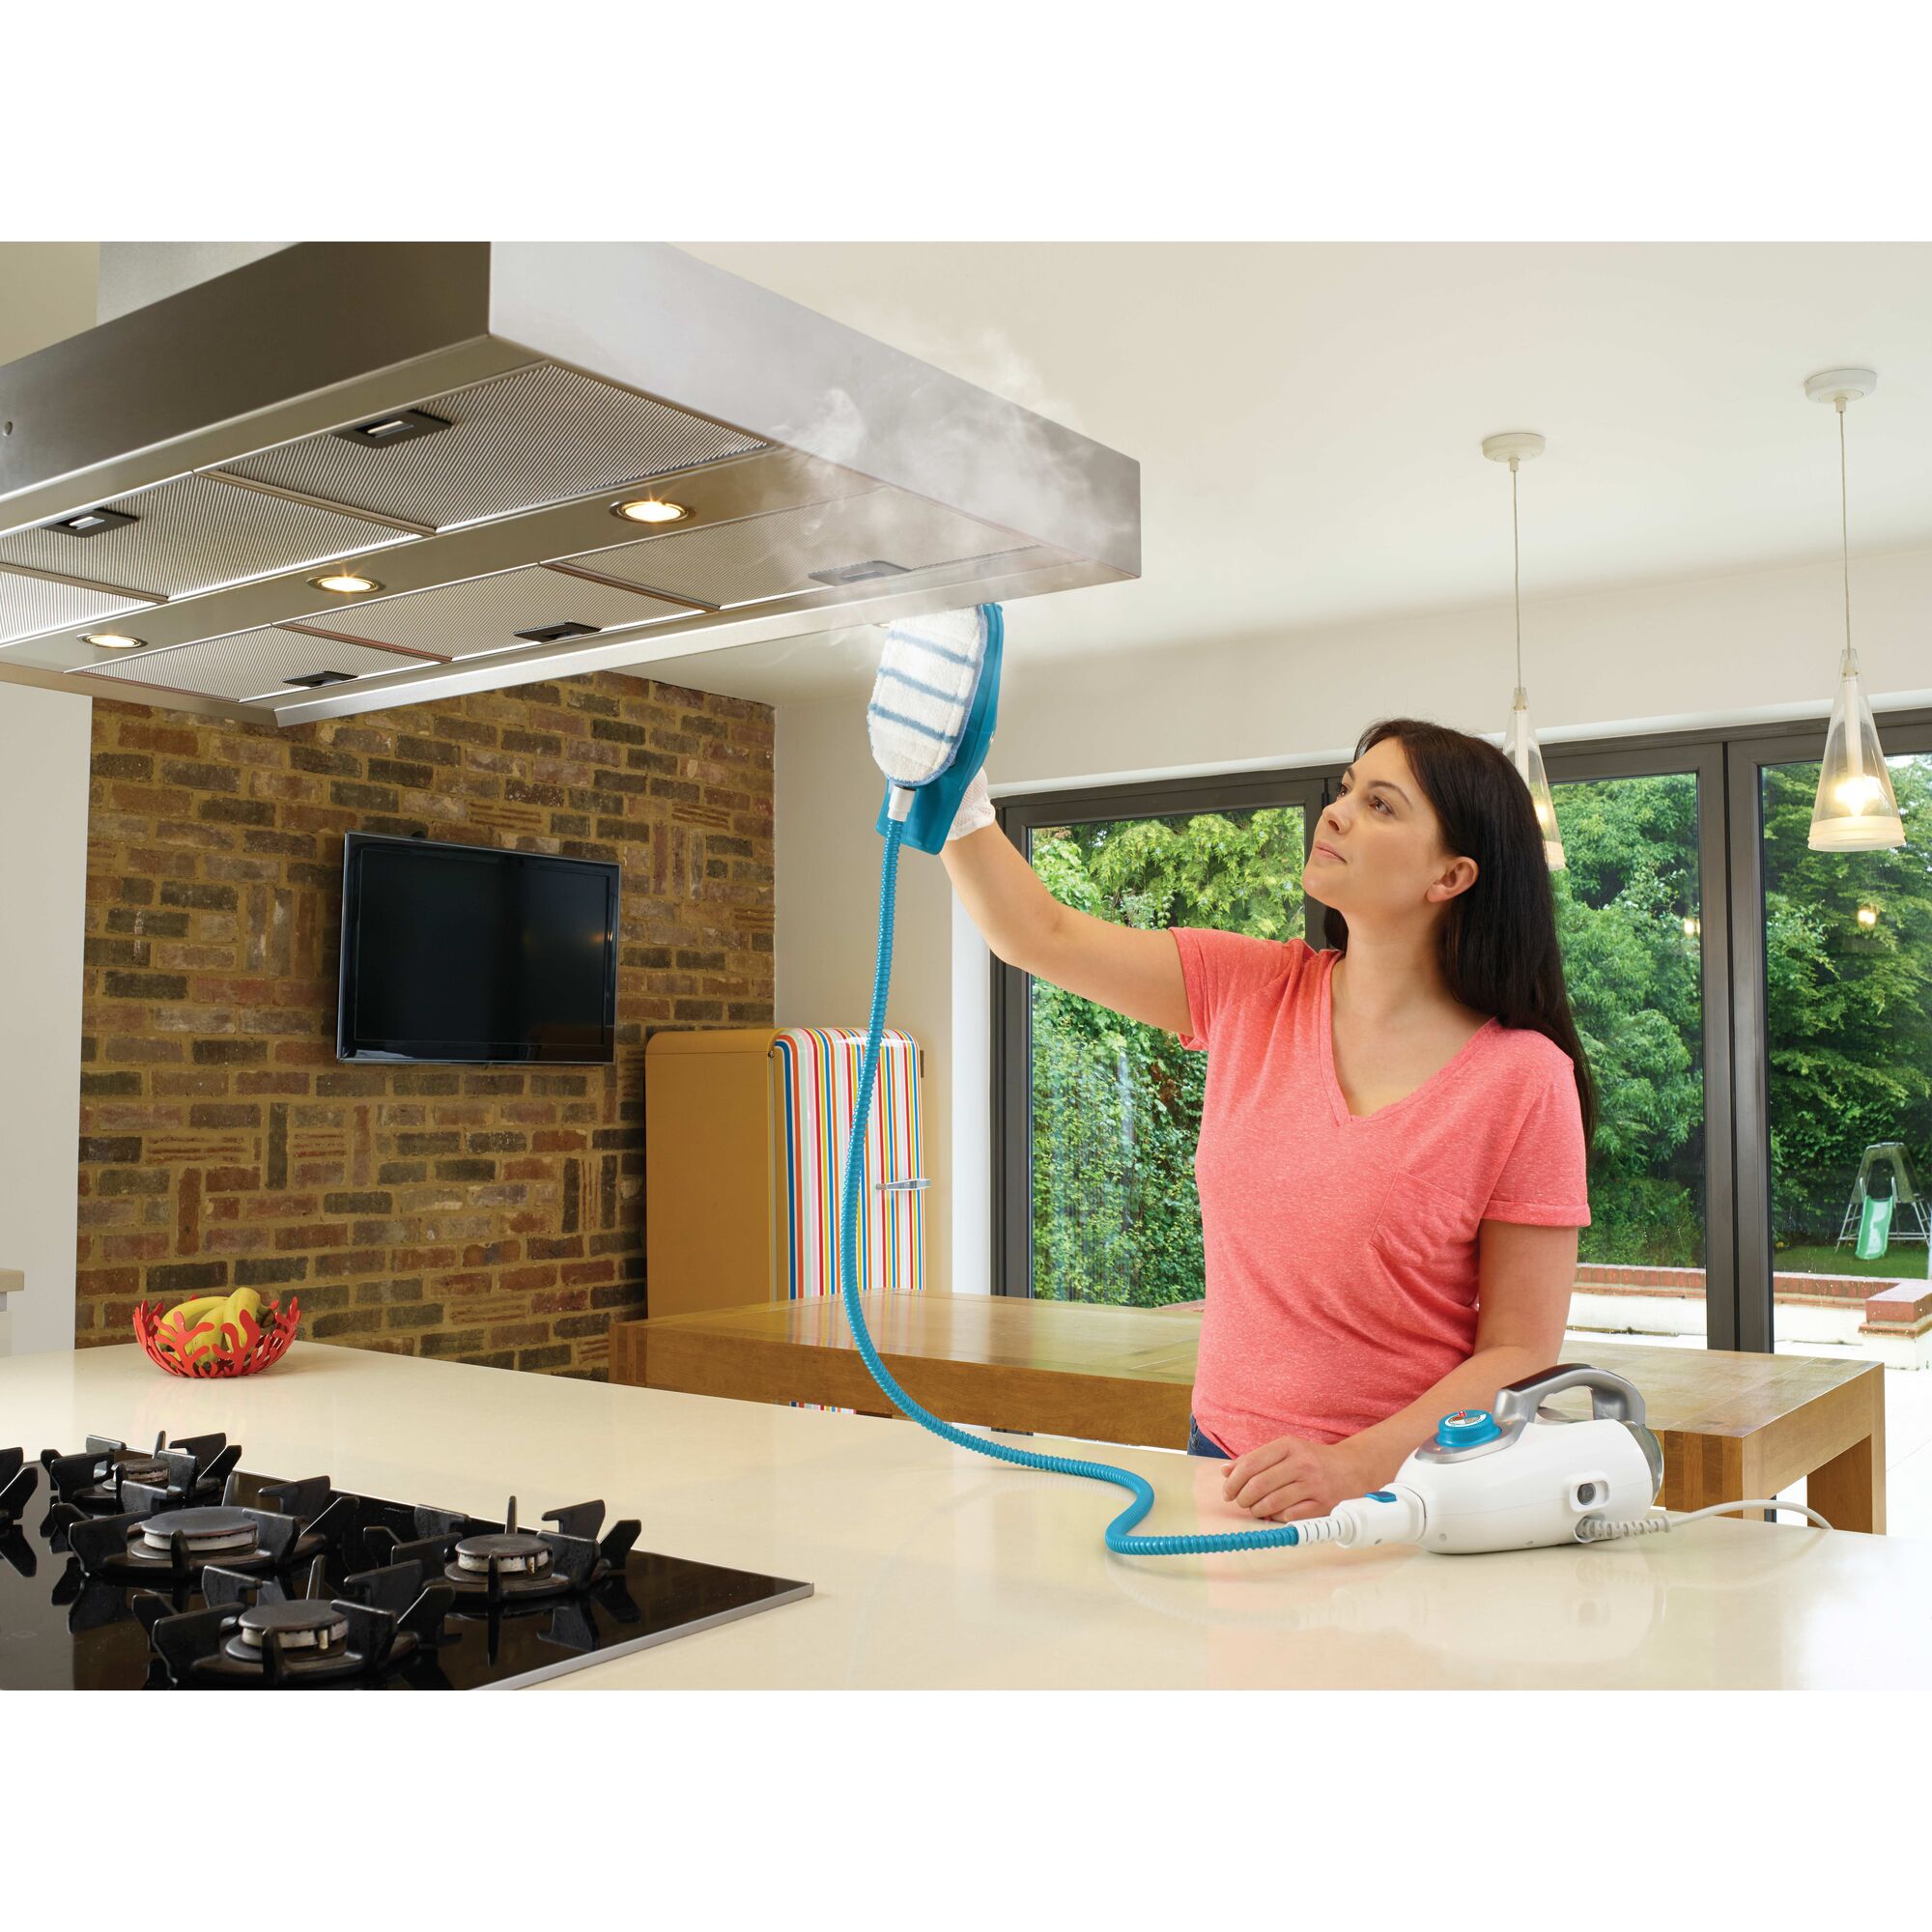 8 in 1 Complete steam cleaning system being used by a person to clean countertop.